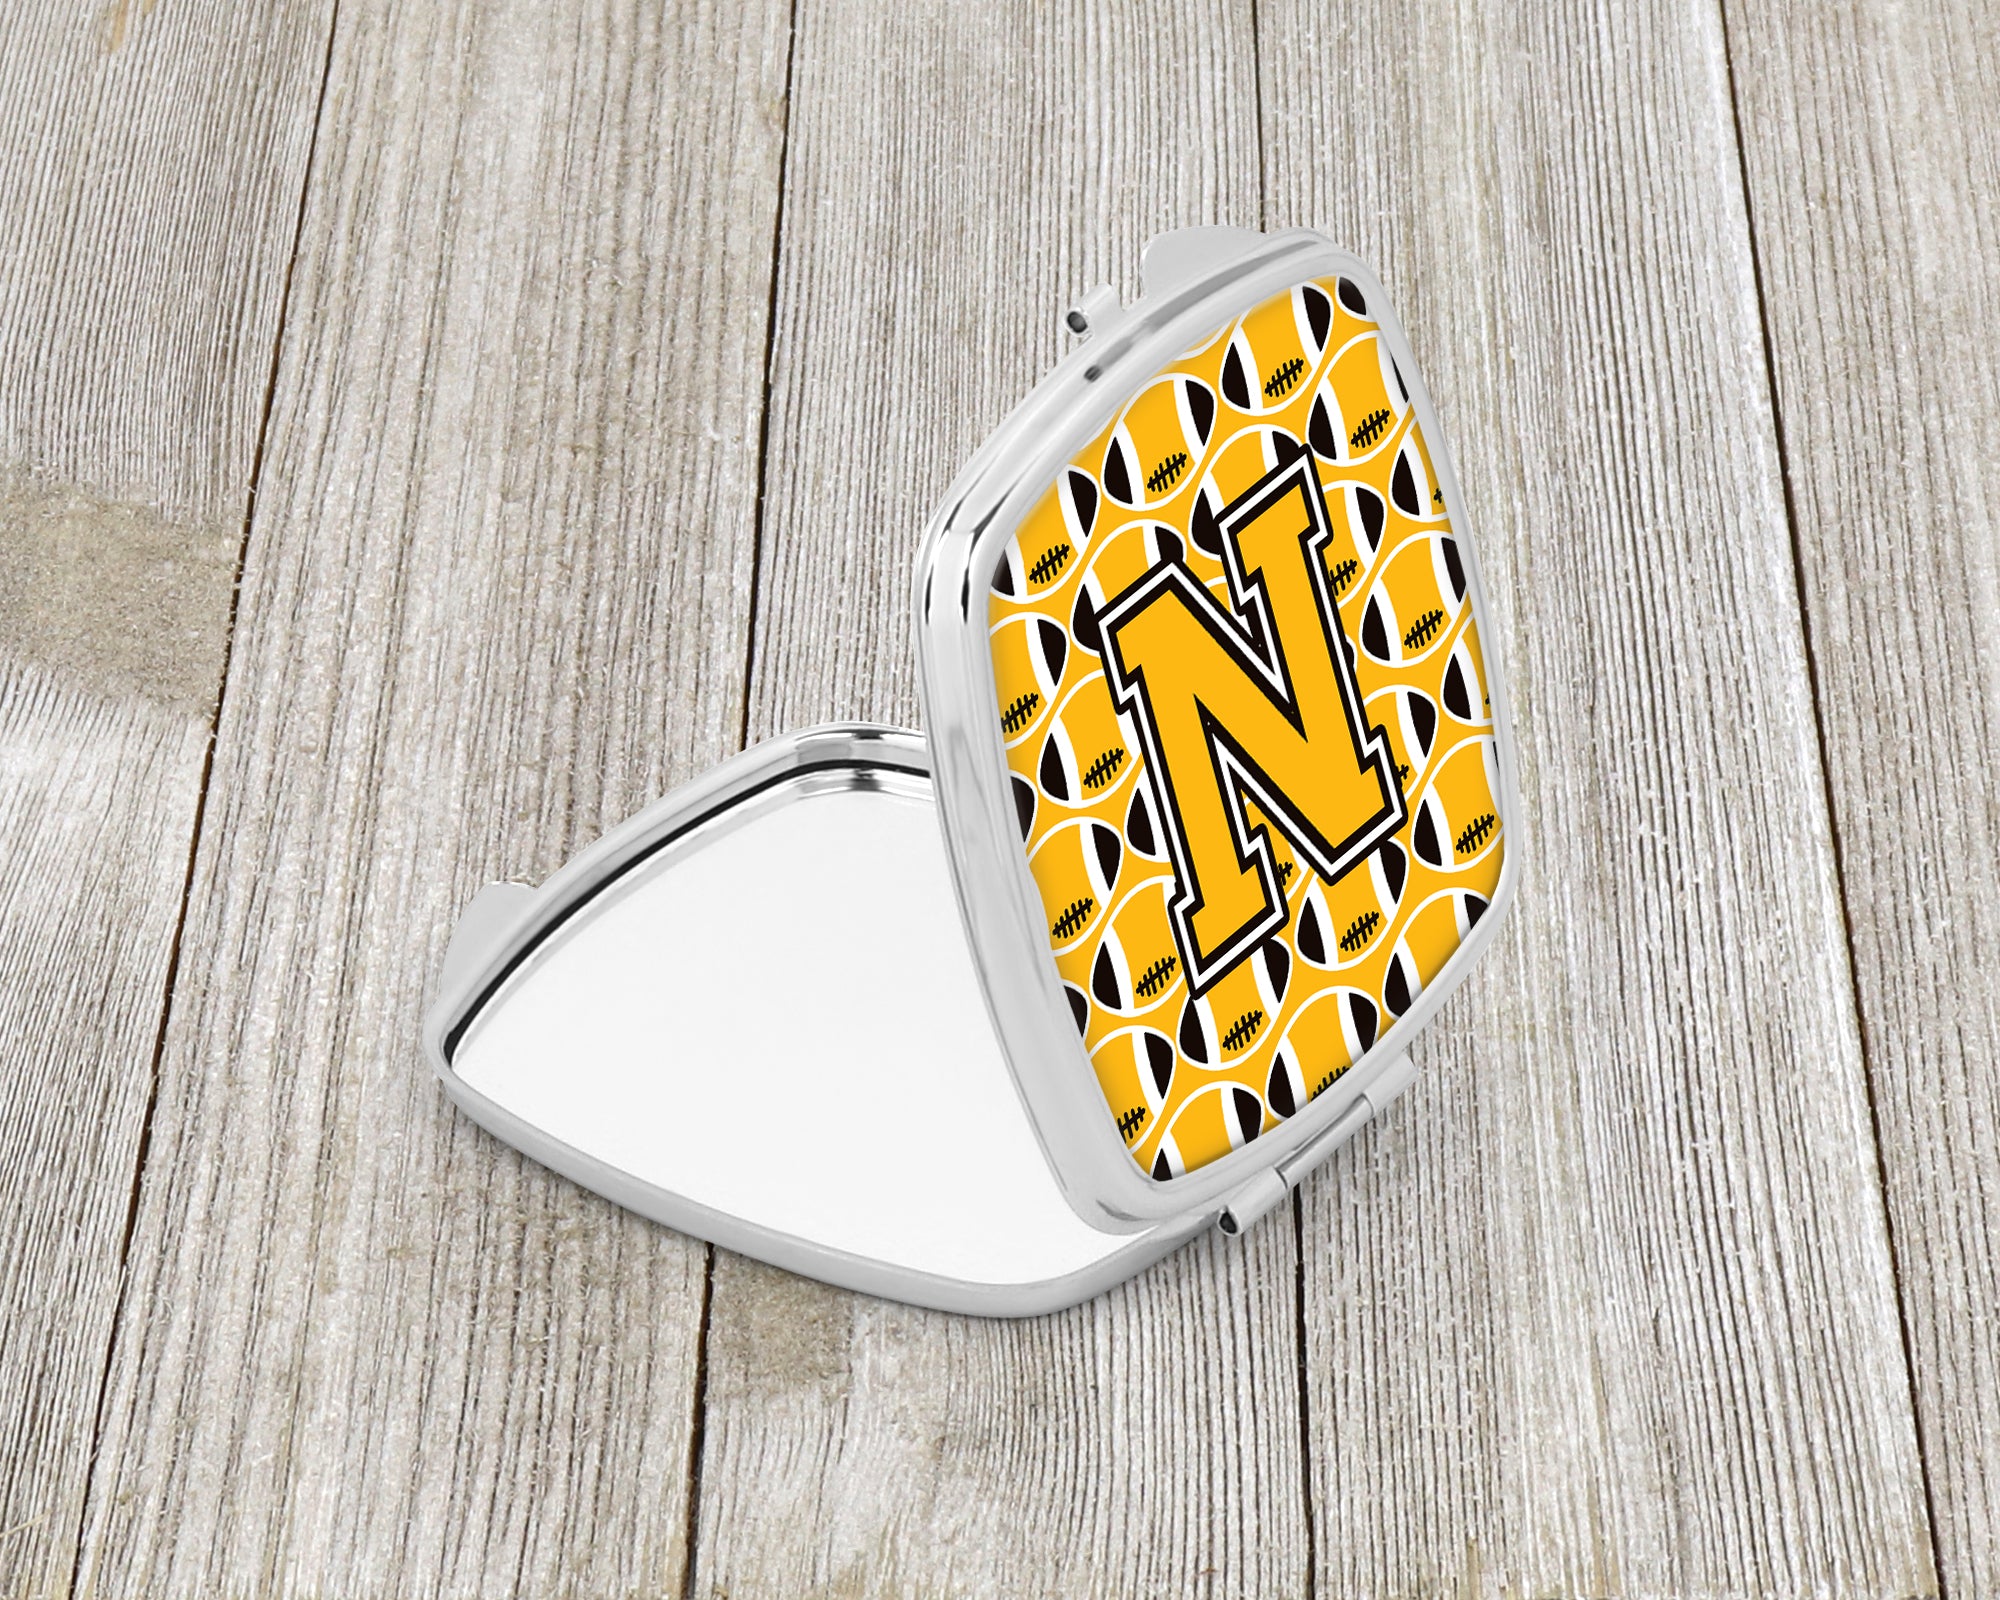 Letter N Football Black, Old Gold and White Compact Mirror CJ1080-NSCM